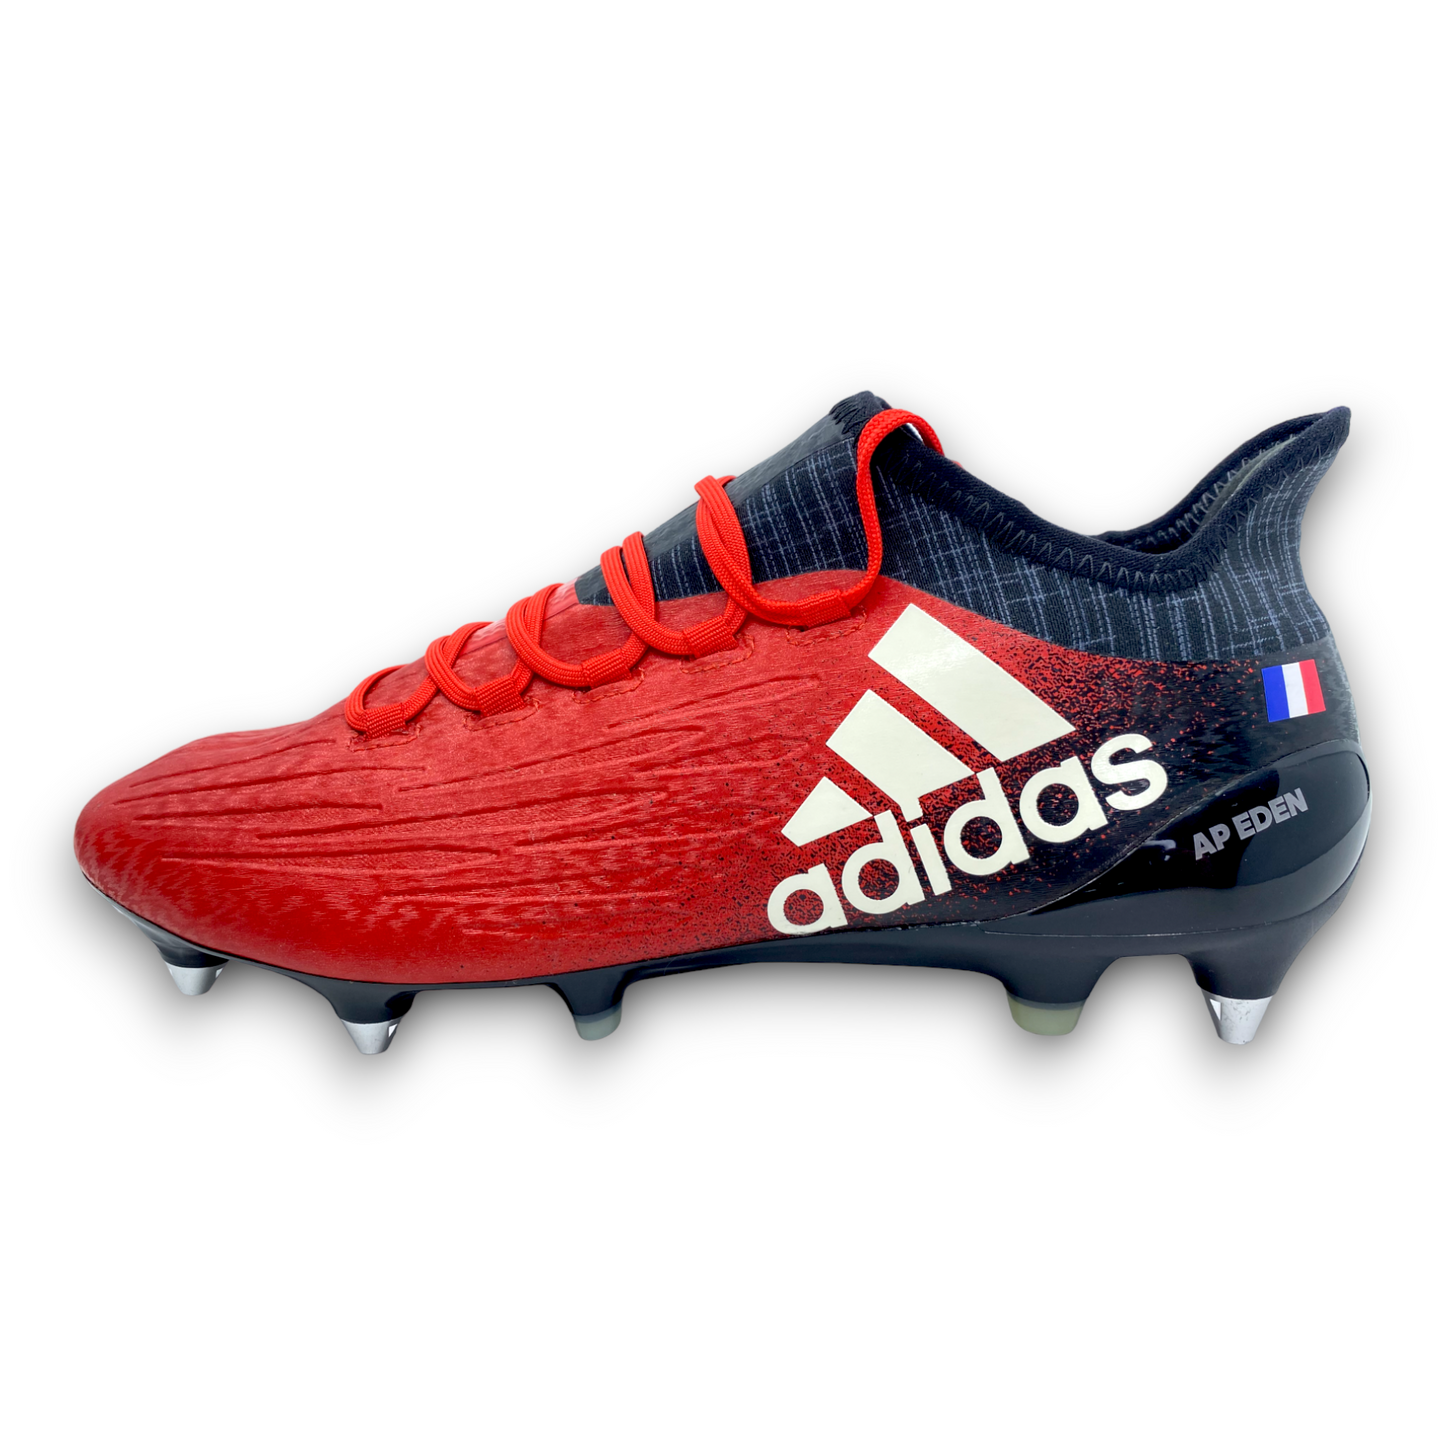 Adidas X 16.1 SG „Pack Red Limit“ Sponsoring Athletenservice Andre Pierre Gignac